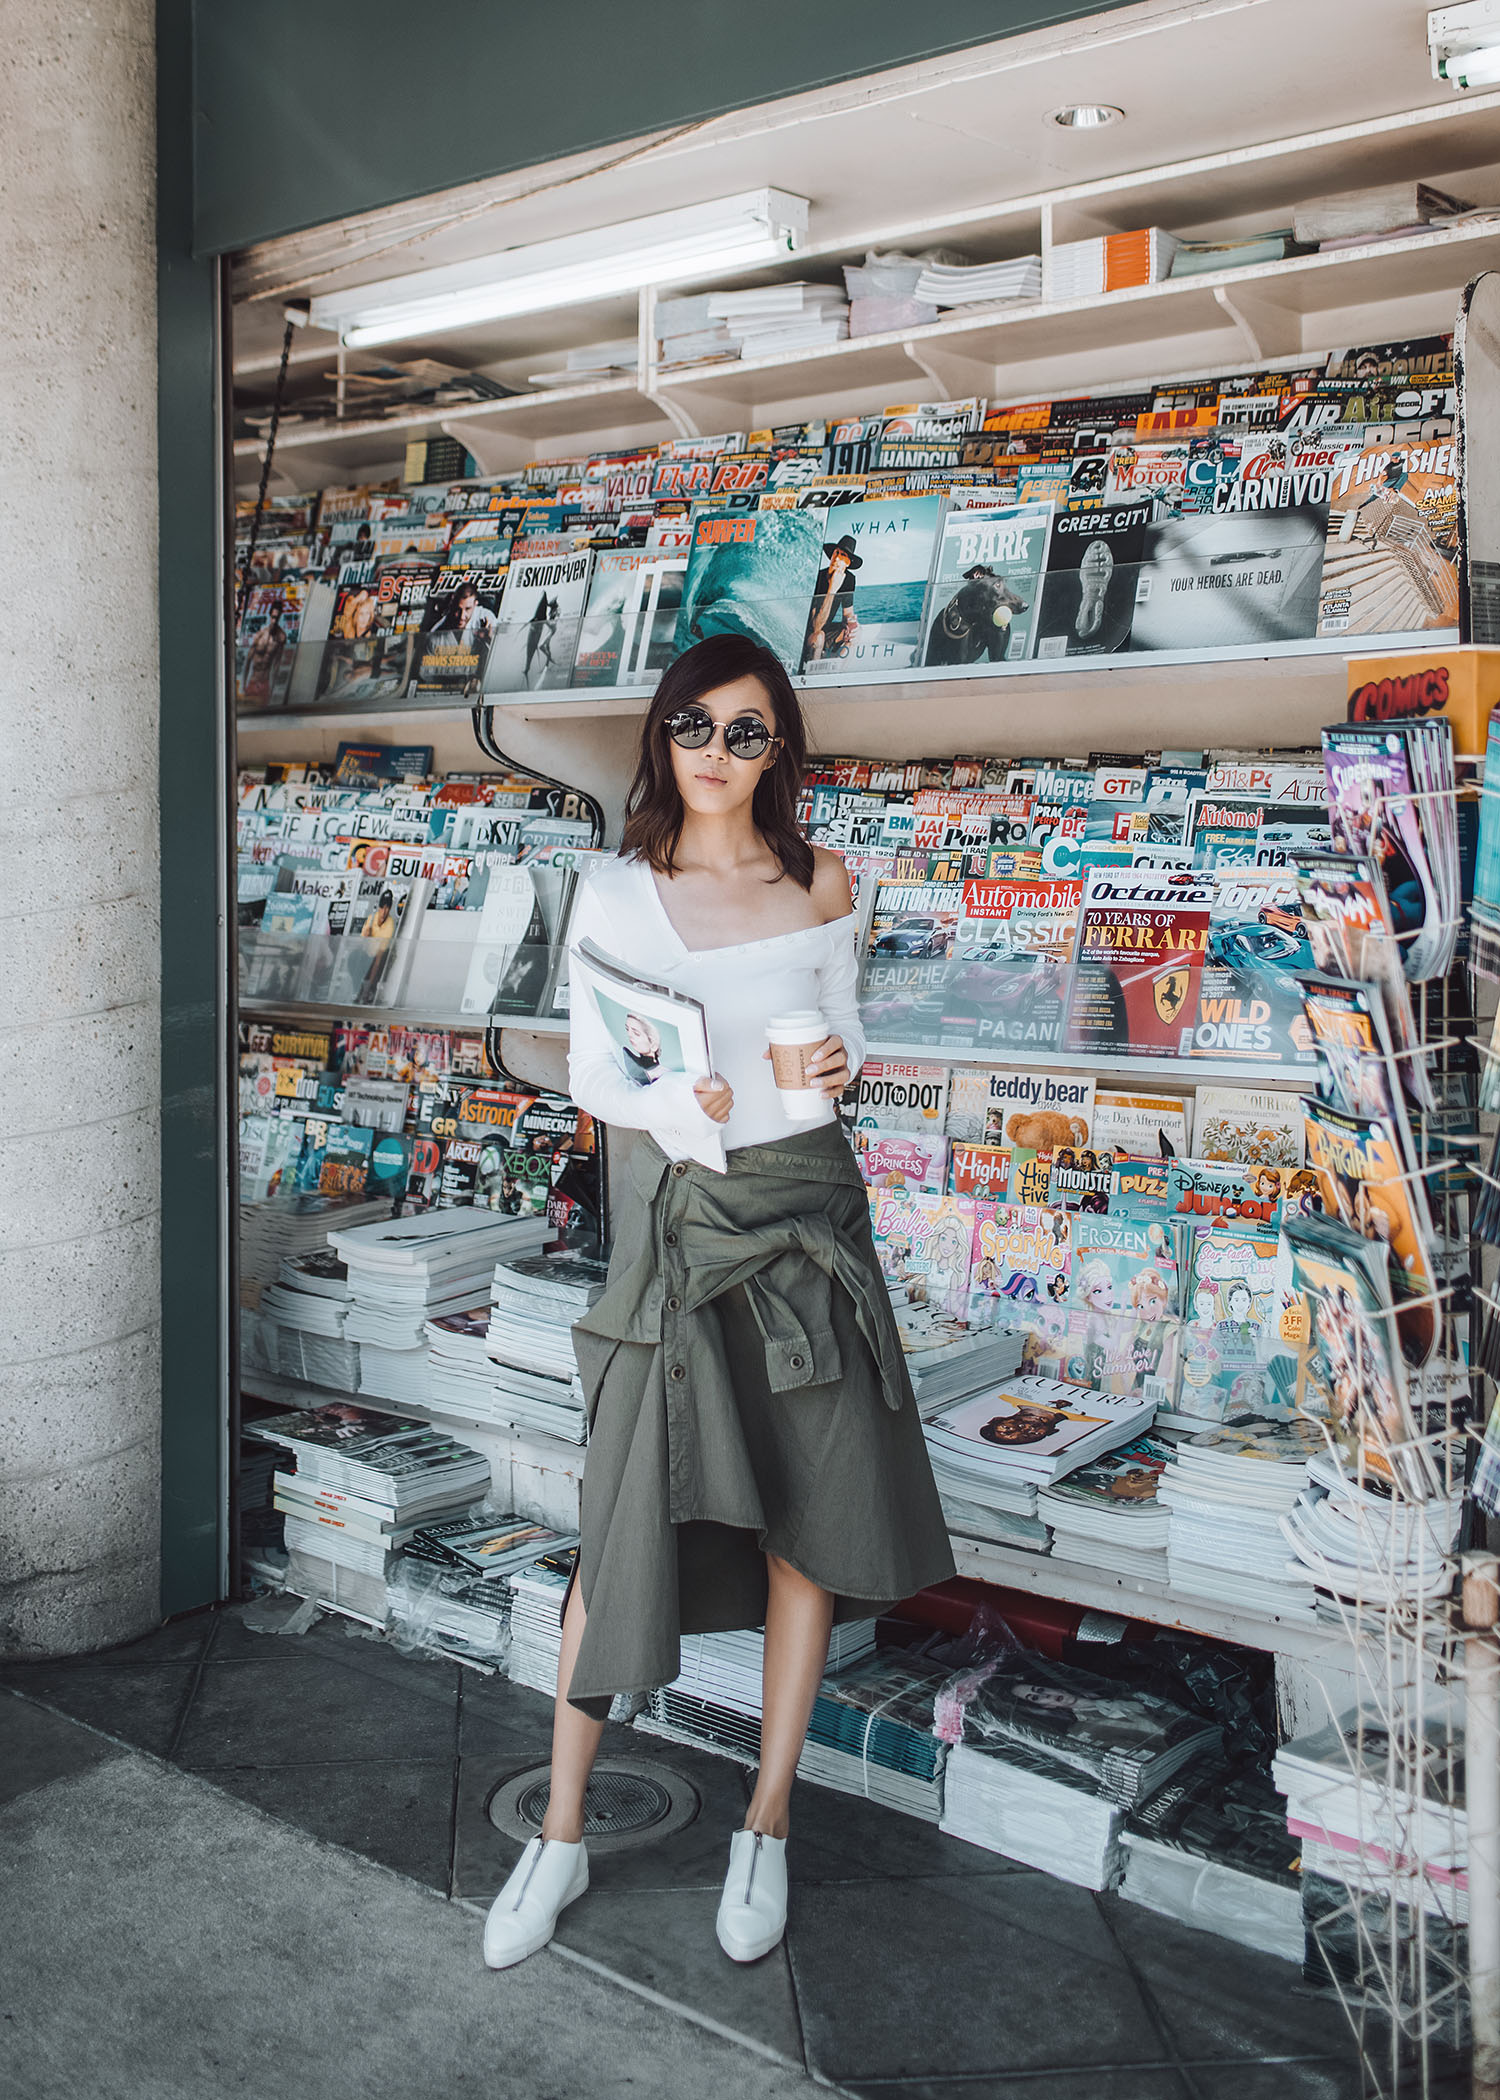 Summer Skirt Trend, Street style fashion blogger influencer Jenny Tsang of Tsangtastic wearing THE HOURS Top, FAITH CONNEXION Shirt Style Skirt, STELLA MCCARTNEY Zip Front Sneaker, in Los Angeles, California.